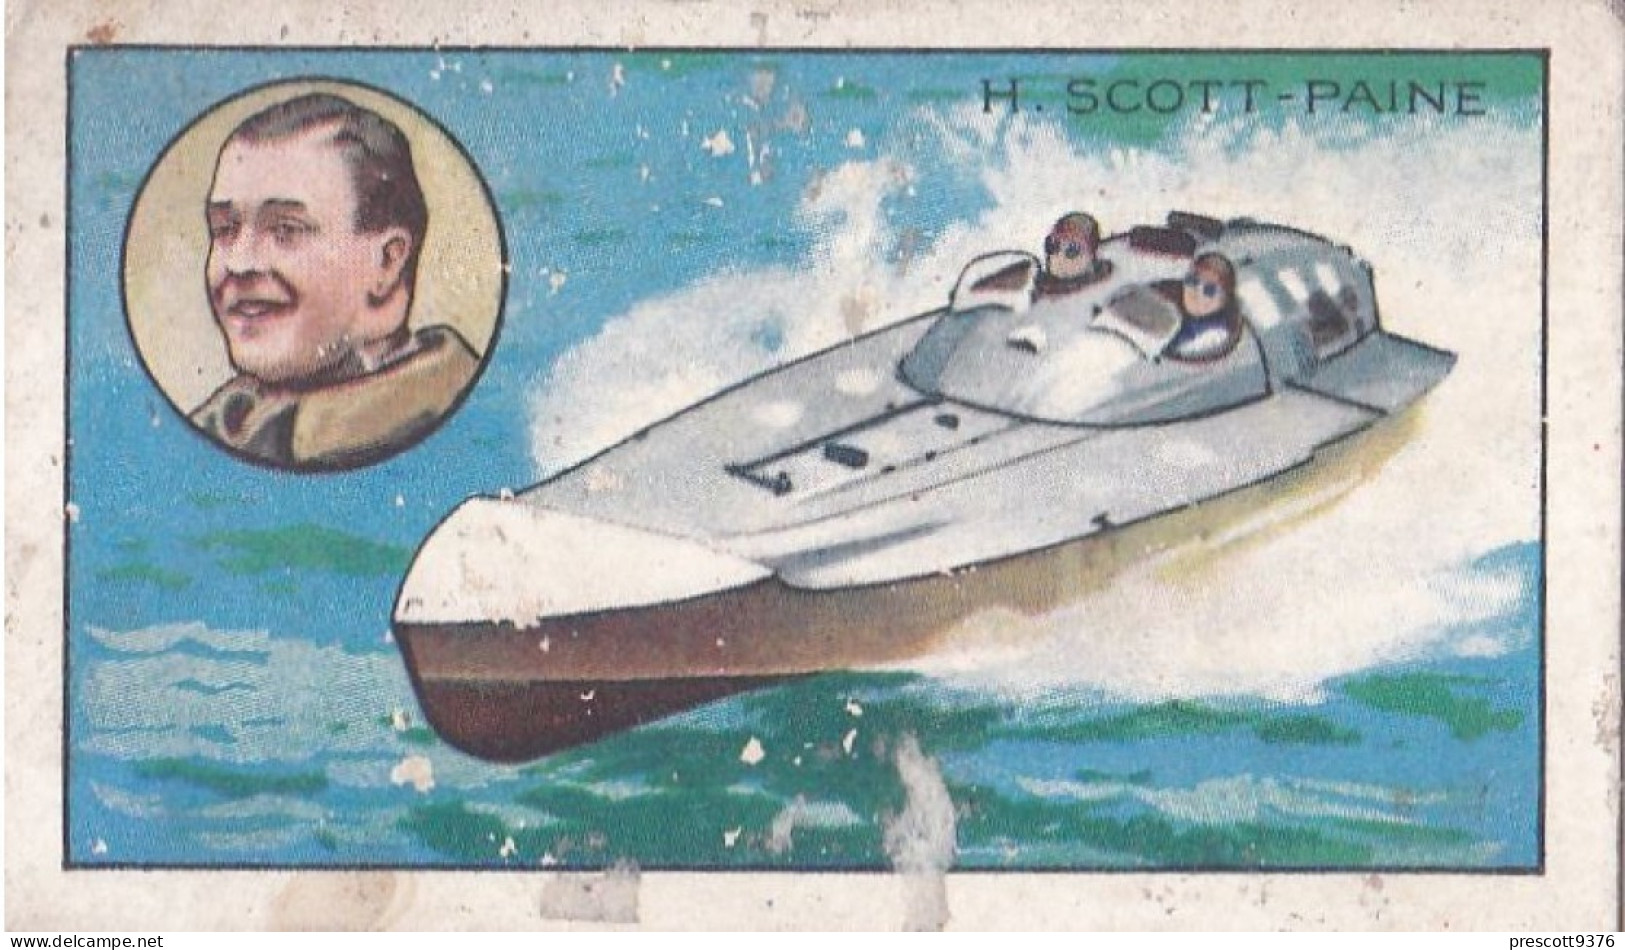 12 H Scott Paine, Motor Boat Racer - Champions 2nd Series 1935 - Gallaher Cigarette Card - Gallaher